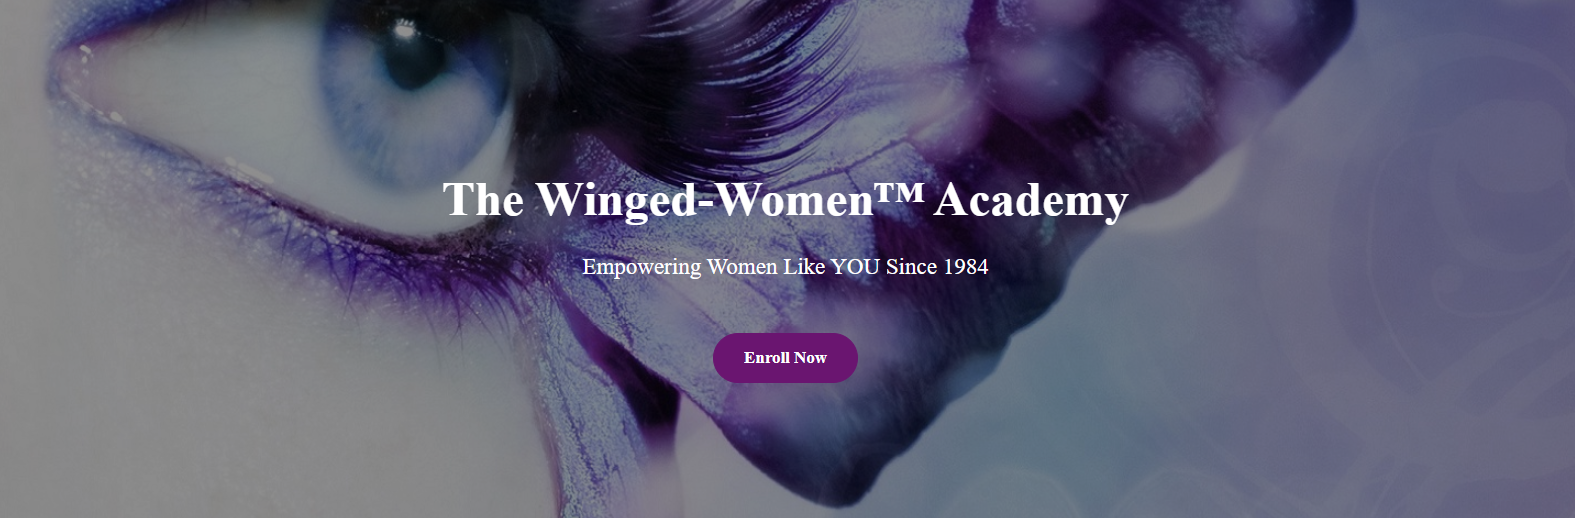 The Winged-Women™ Academy Needs YOUR Help!